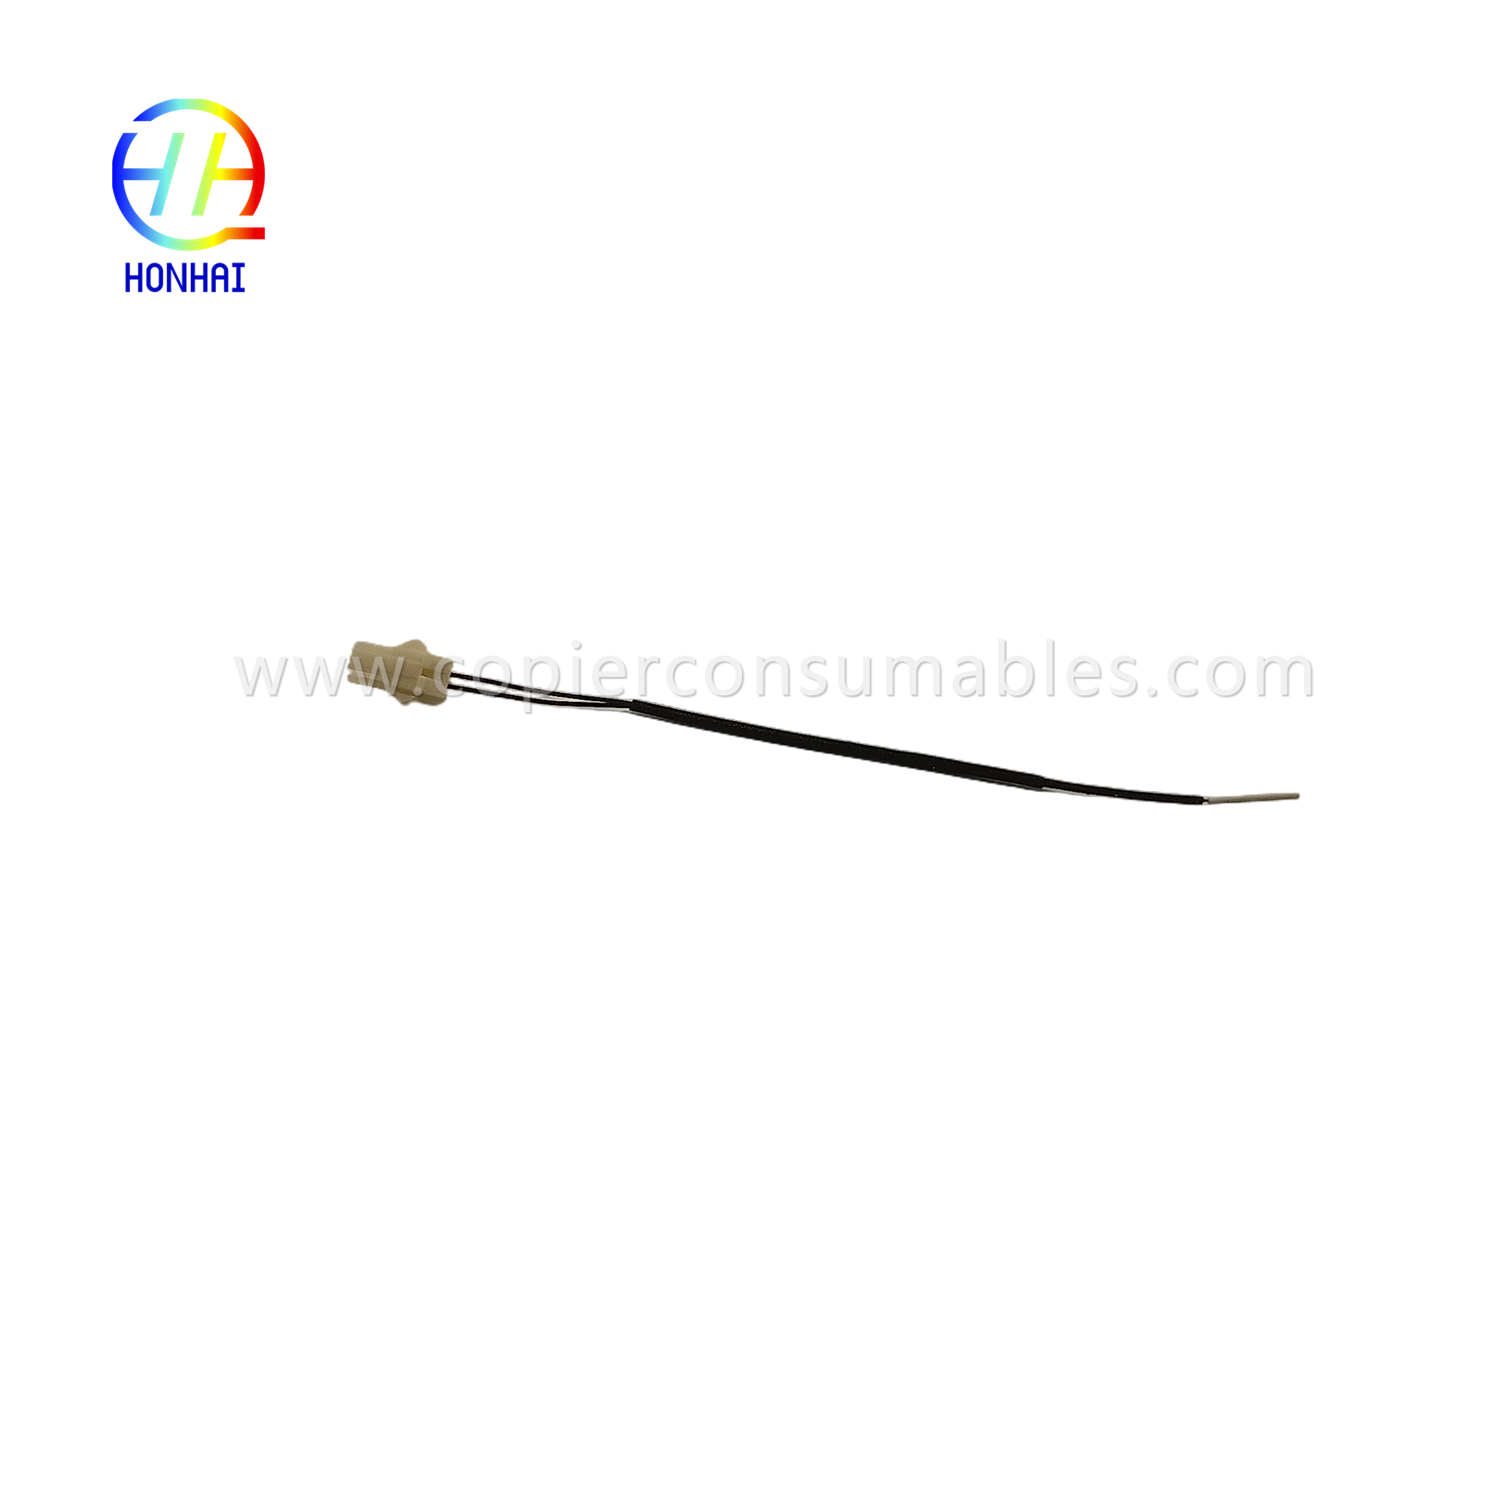 https://www.copierconsumables.com/fuser-thermistor-for-oce-9400-tds300-tds750pw300350-product/